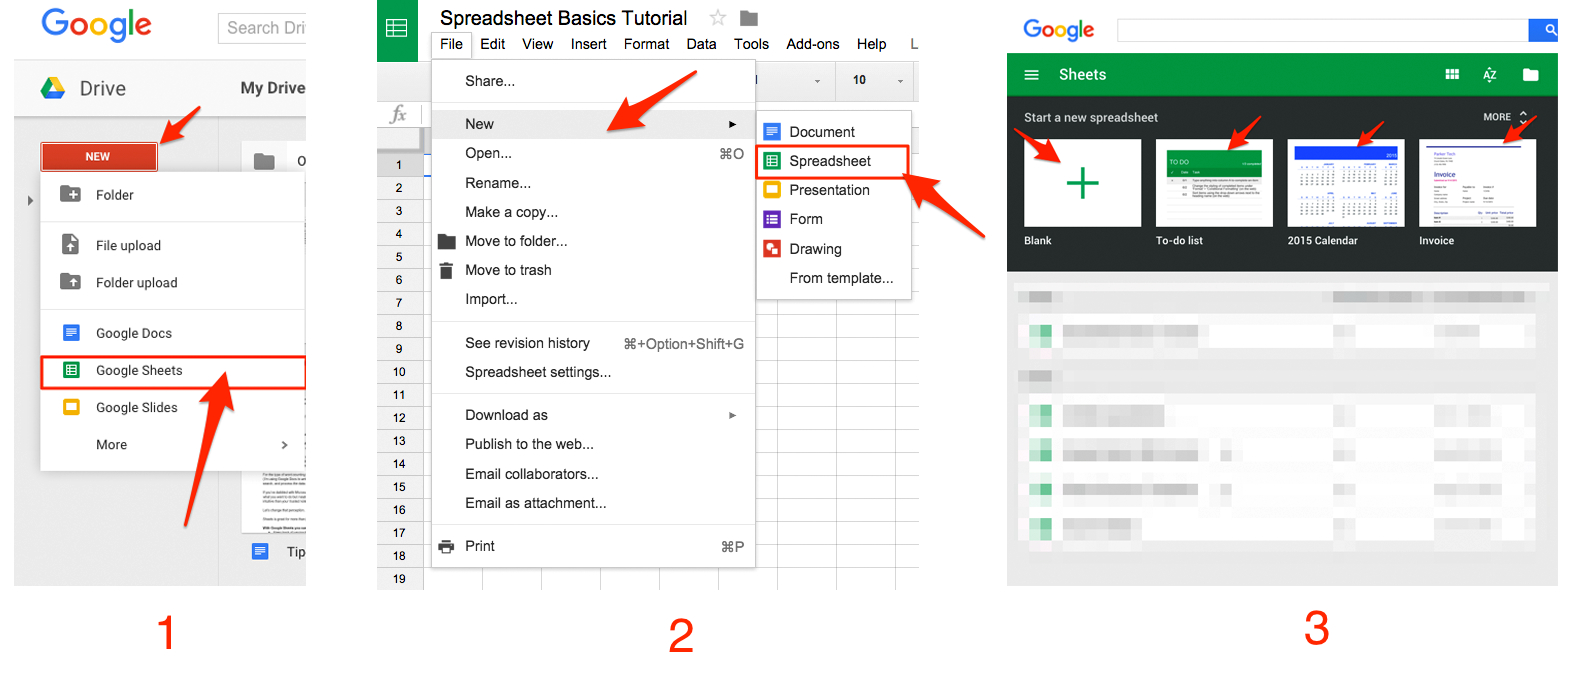 Create Google Doc Spreadsheet With Google Sheets 101: The Beginner's Guide To Online Spreadsheets  The